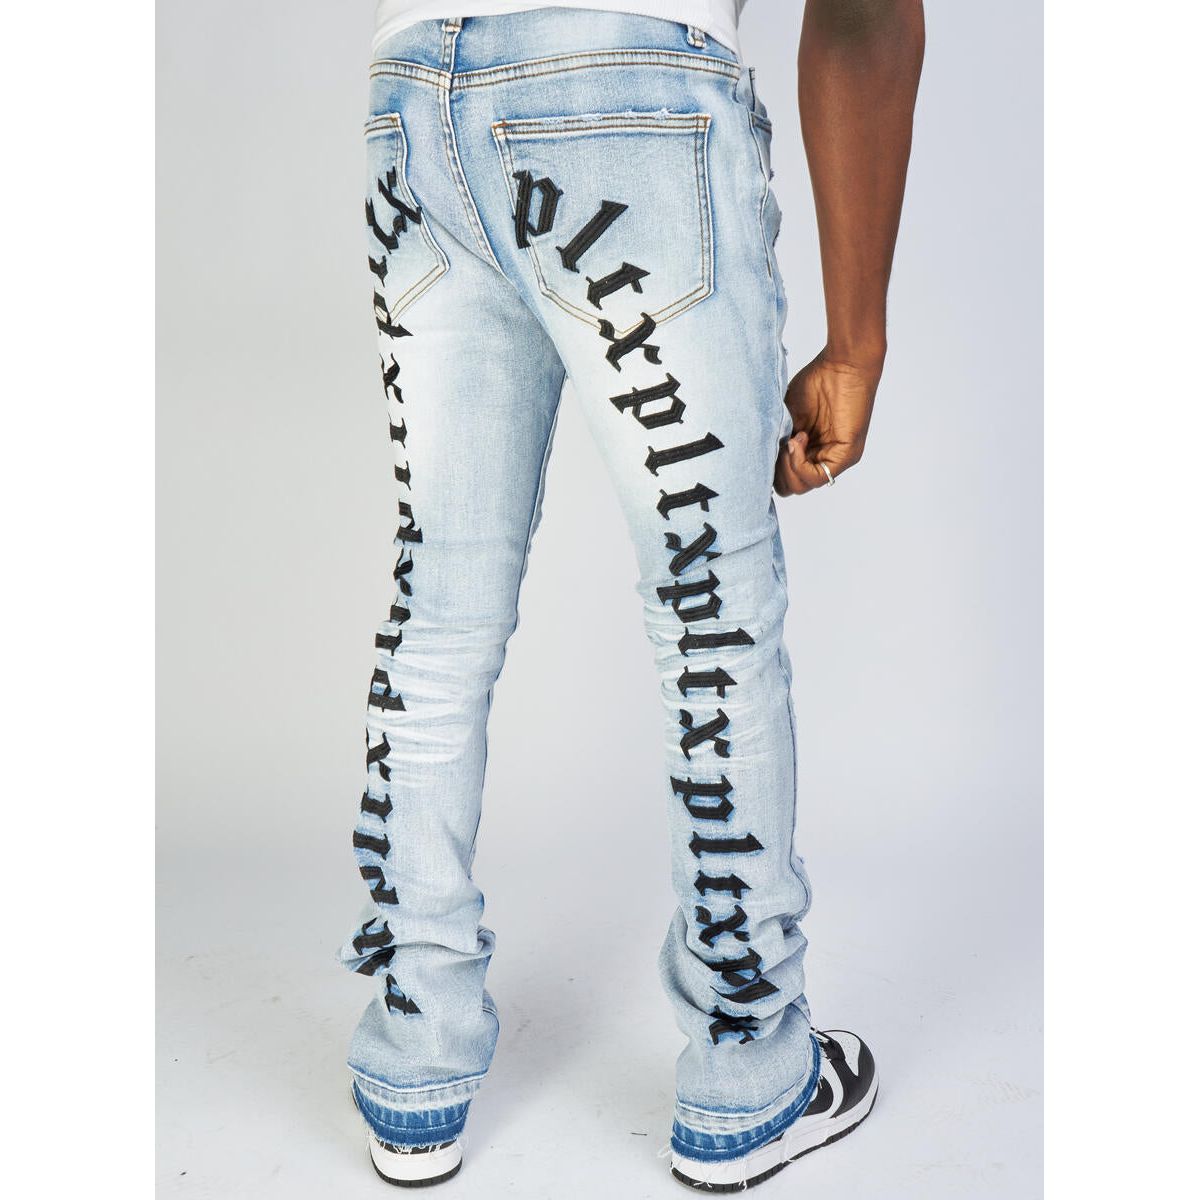 Politics Jeans - Mac - Embroidered Skinny Stacked Flare - Light Blue And Black - 511